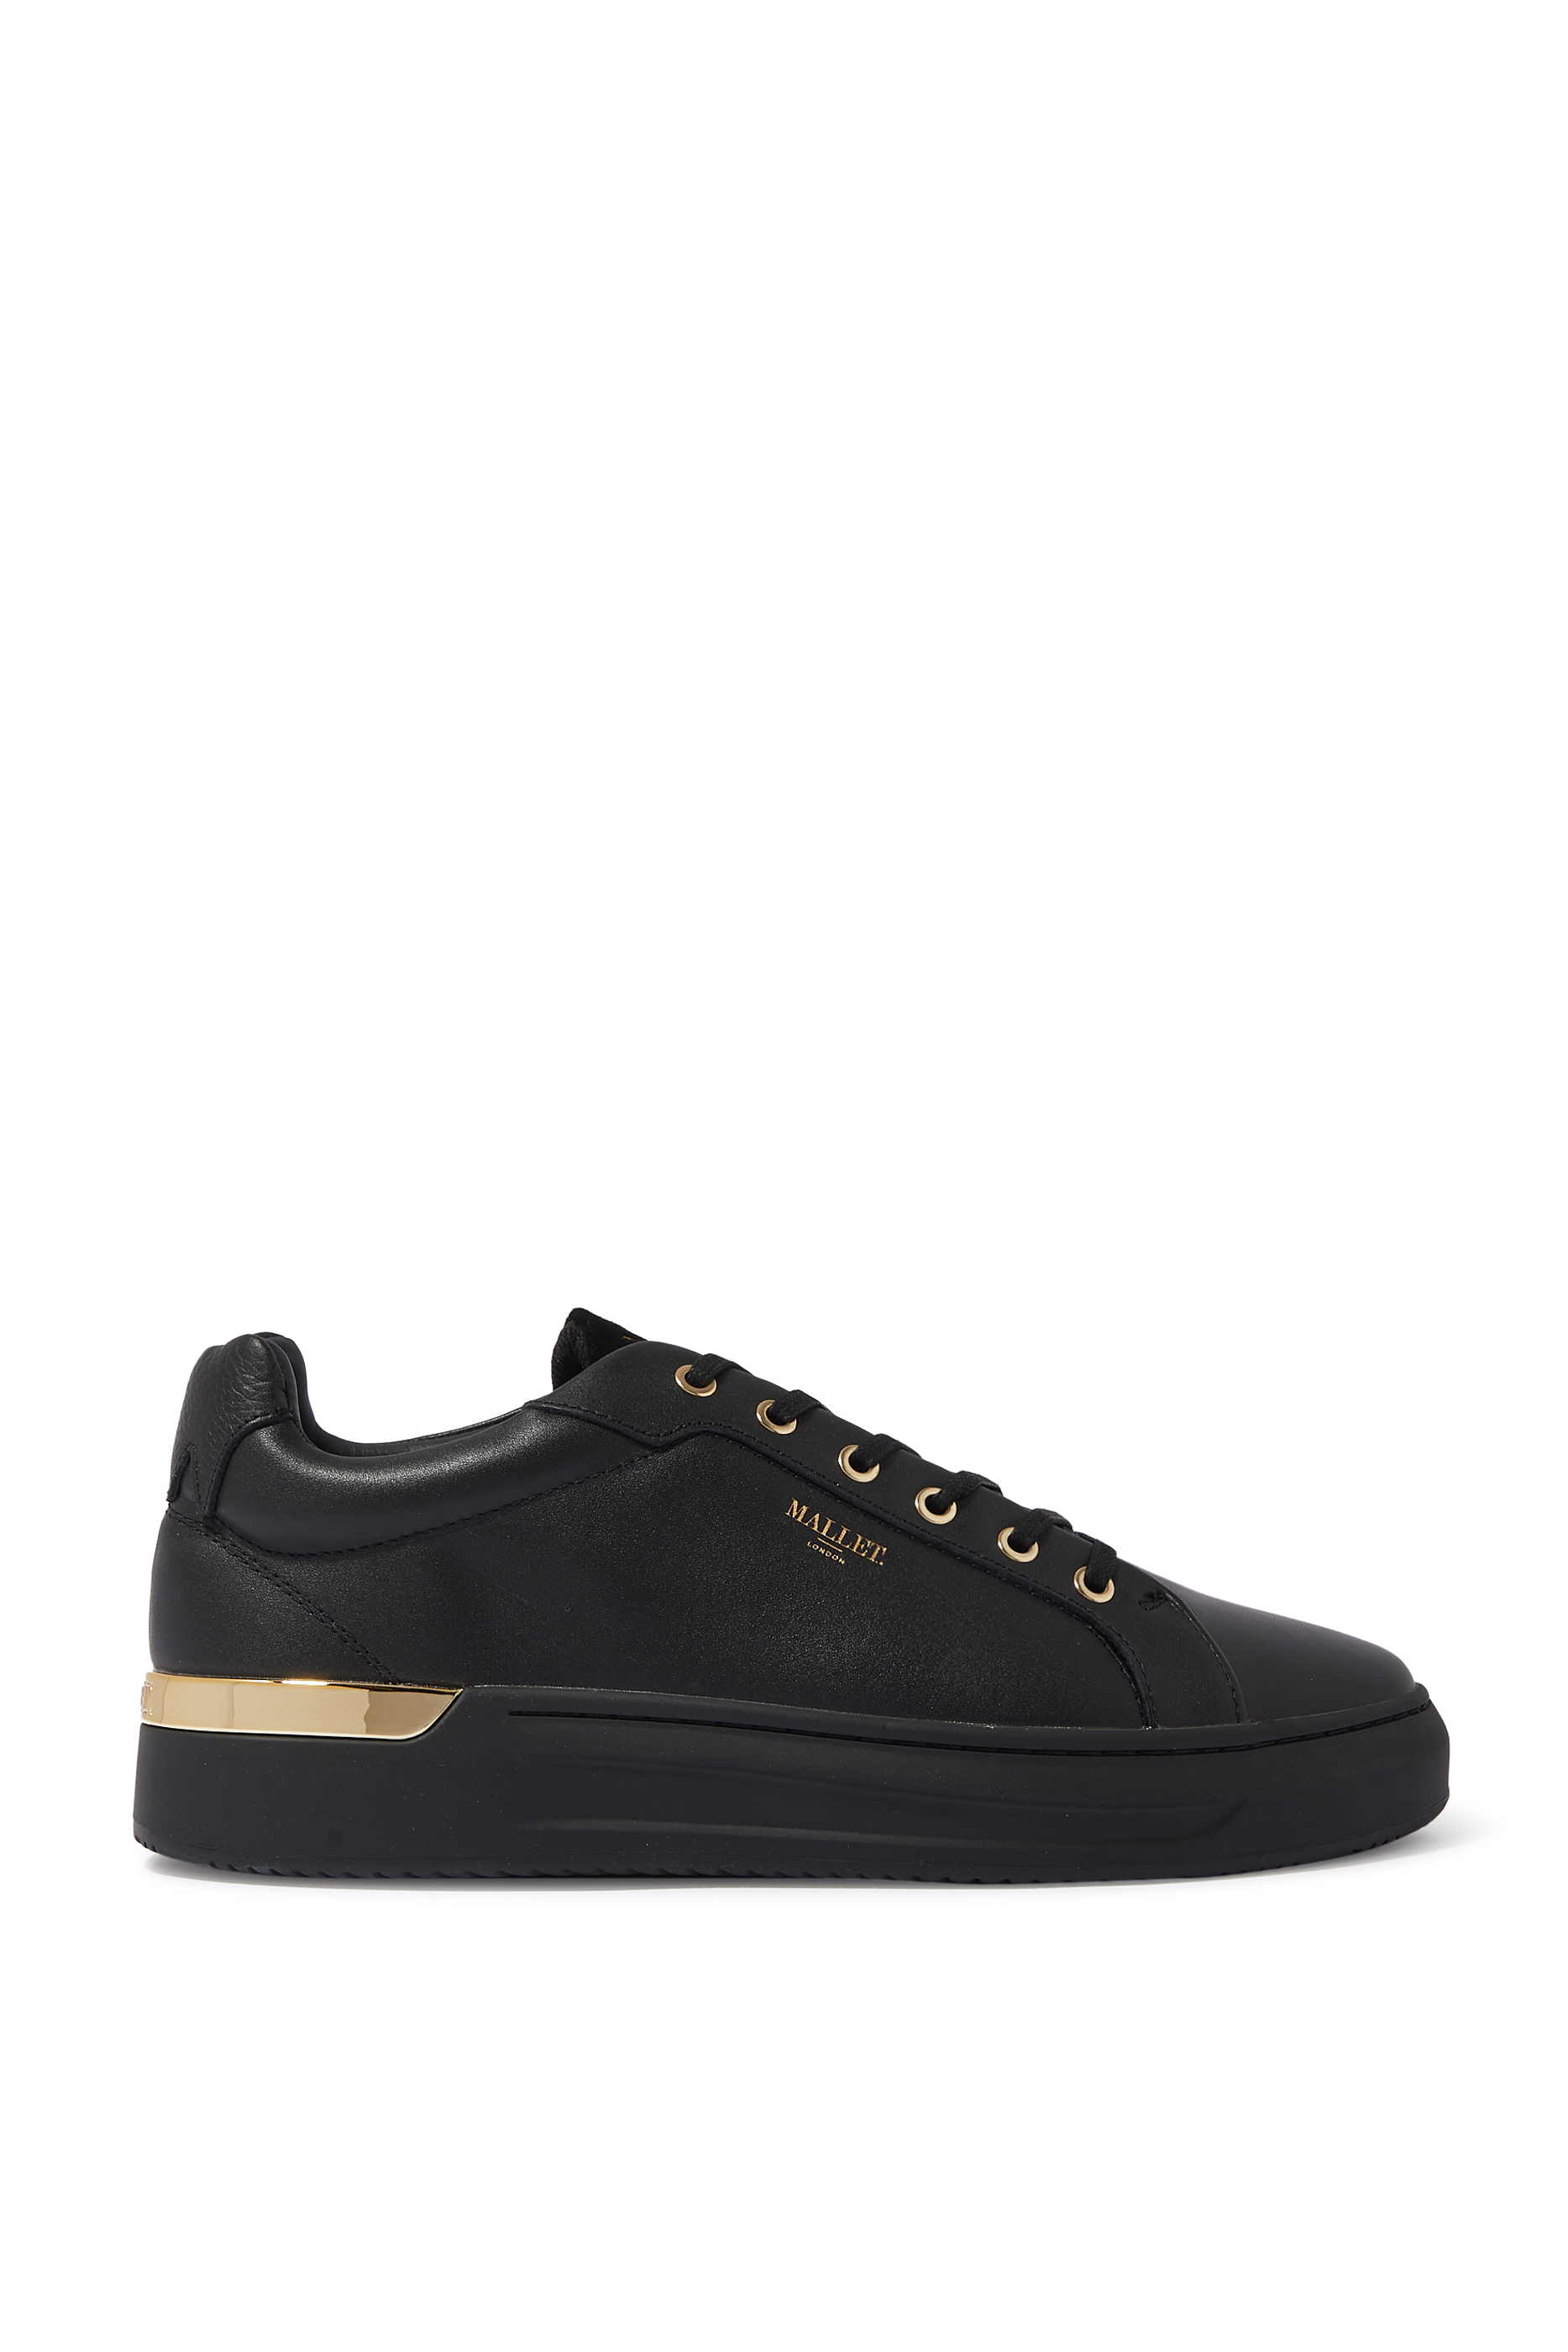 Buy Mallet GRFTR Midnight Leather Gold Sneakers - Mens for AED 450.00 ...